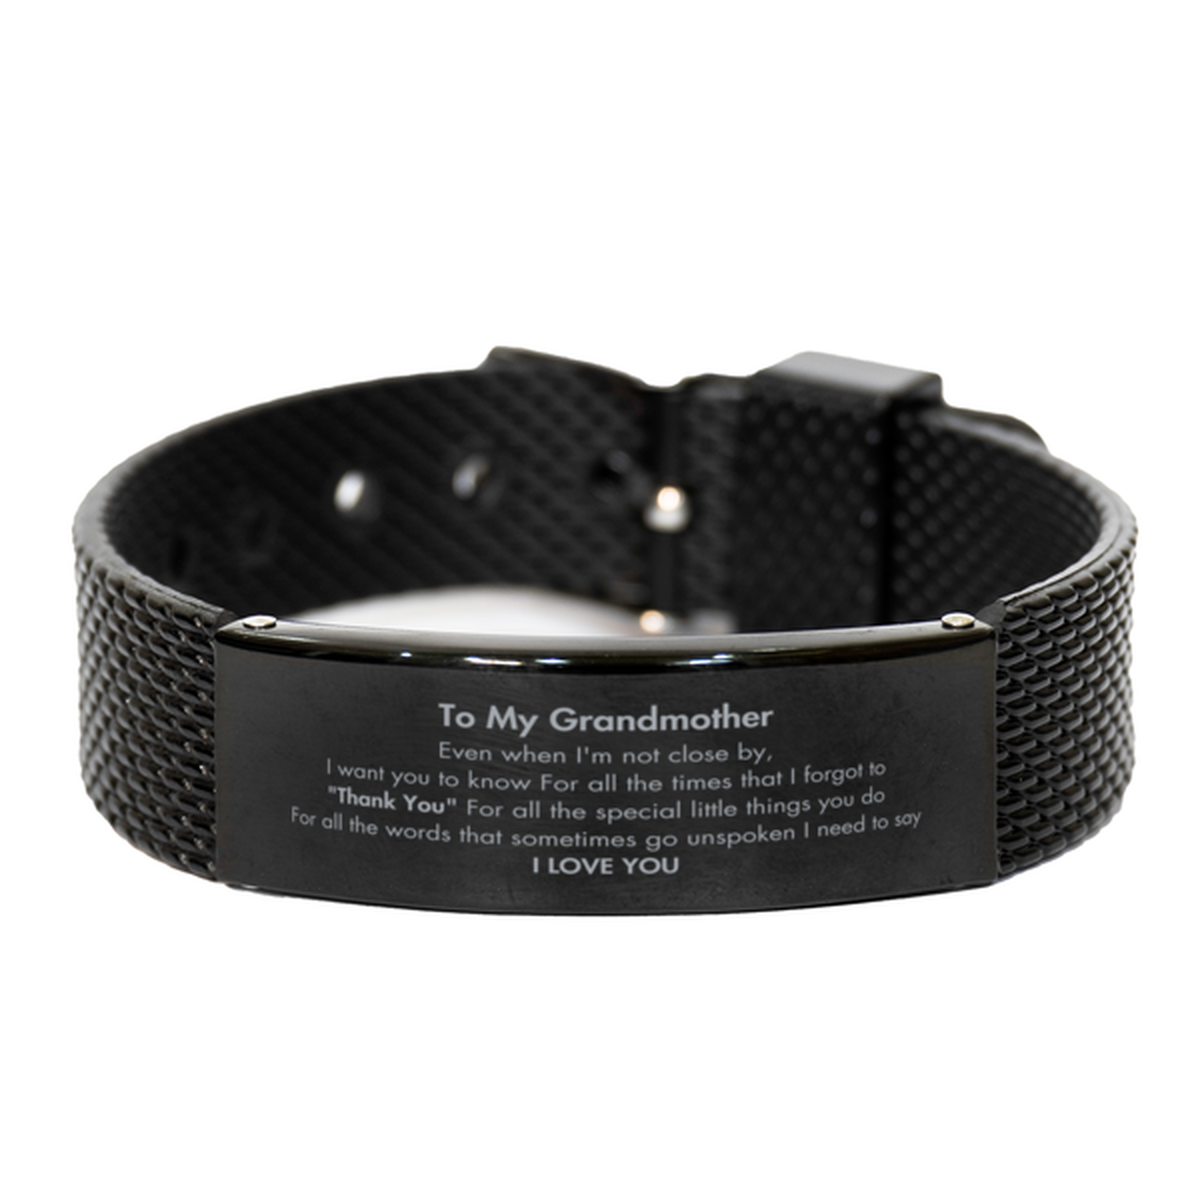 Thank You Gifts for Grandmother, Keepsake Black Shark Mesh Bracelet Gifts for Grandmother Birthday Mother's day Father's Day Grandmother For all the words That sometimes go unspoken I need to say I LOVE YOU